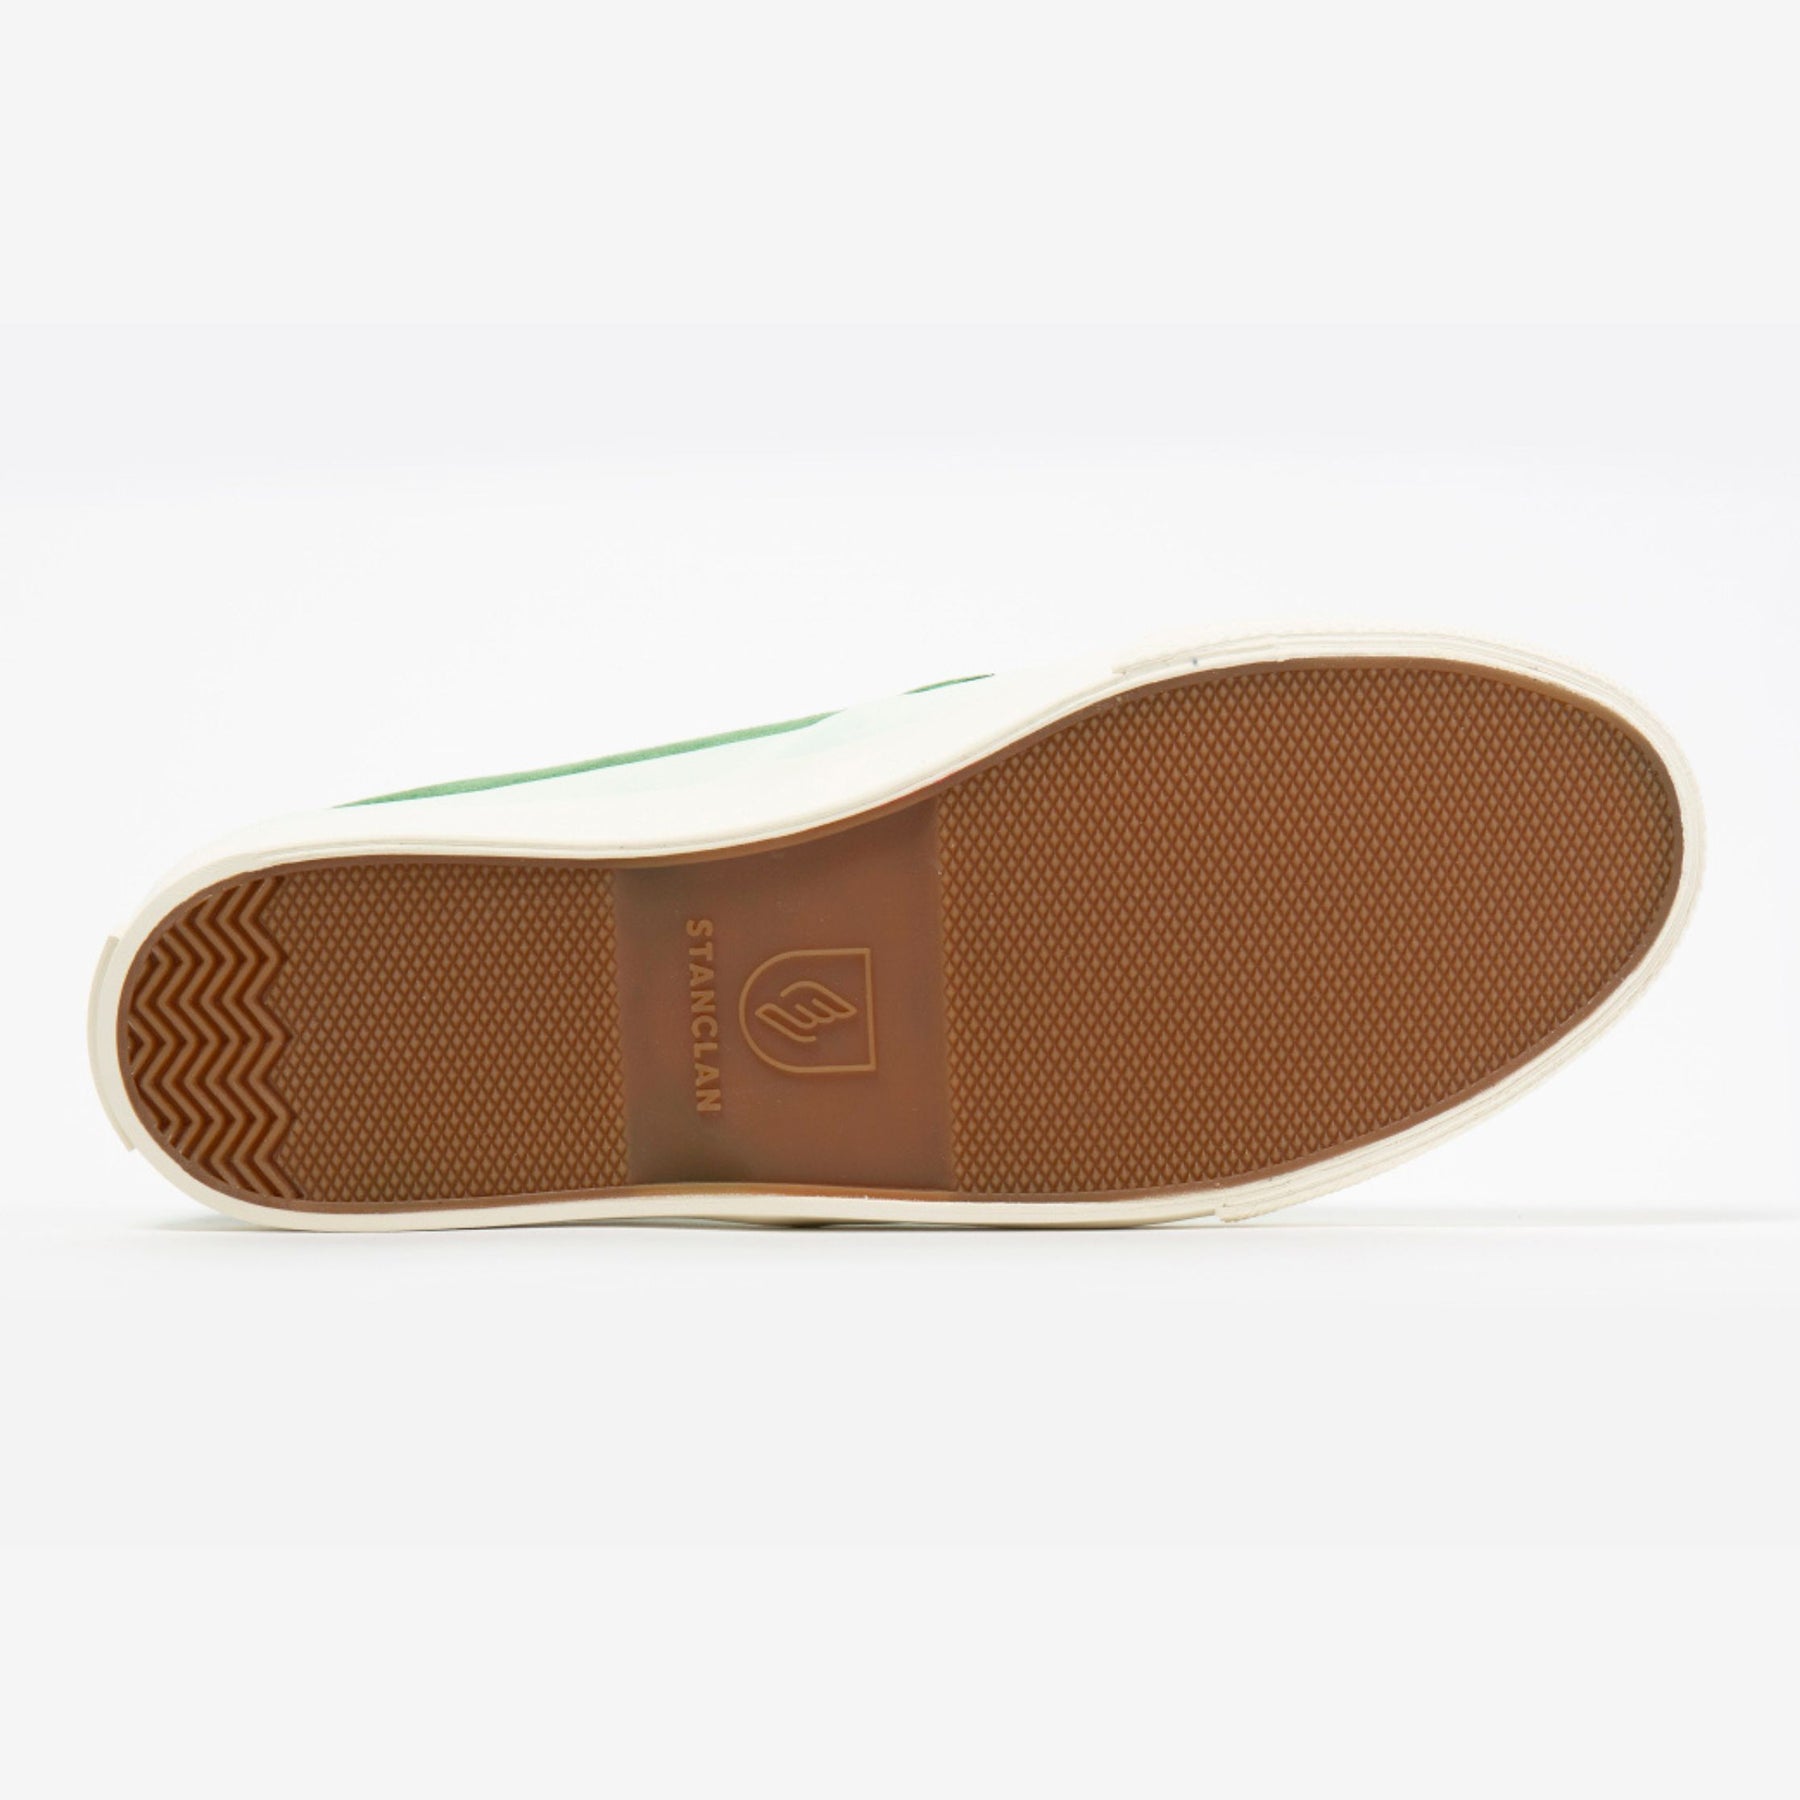 ZUPPA Suede Lotus Green